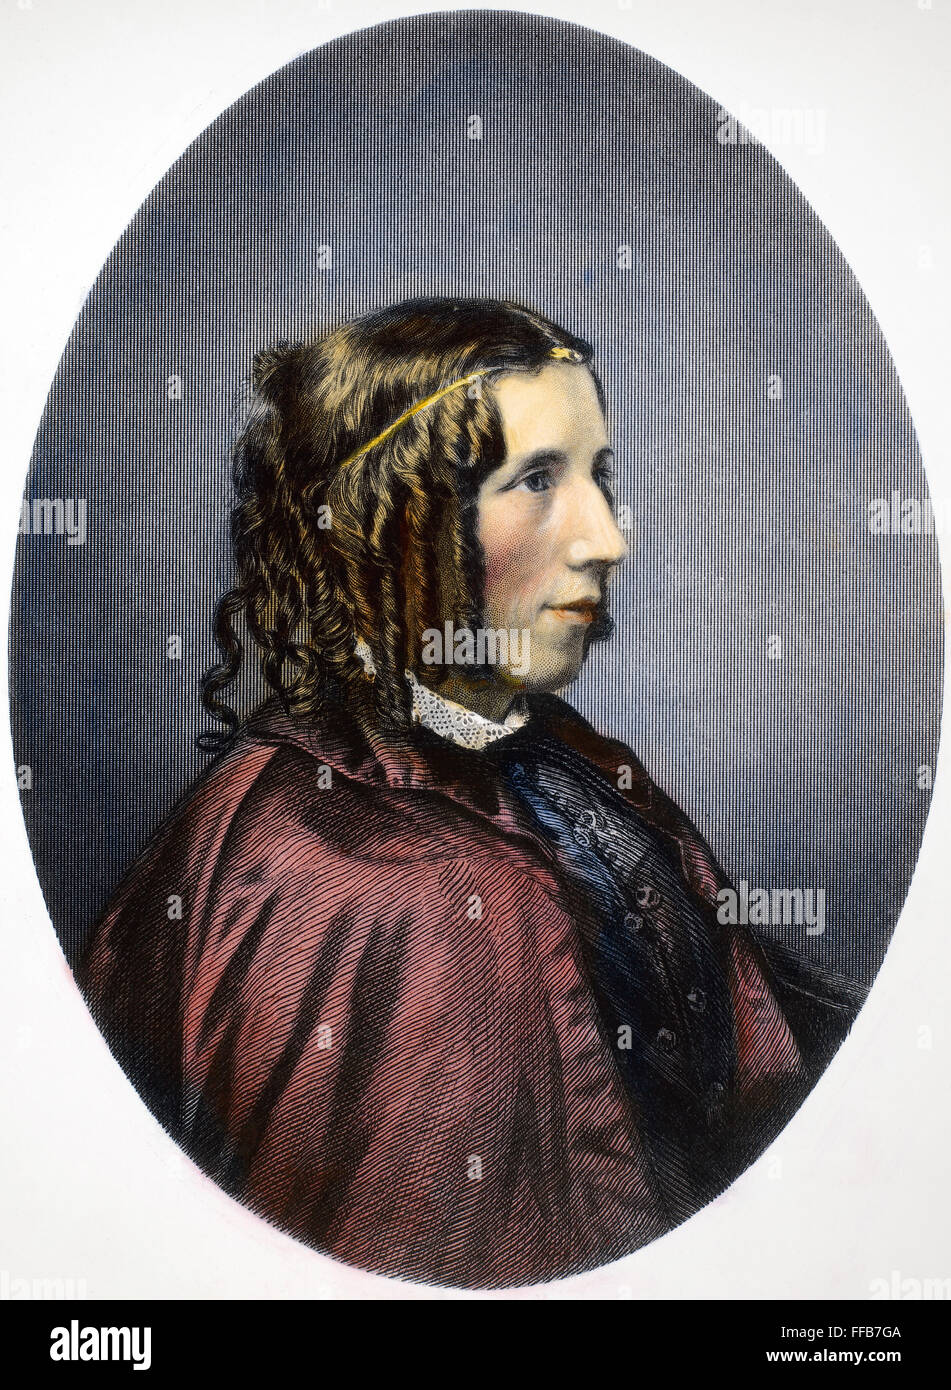 HARRIET BEECHER STOWE /n(1811-1896). American abolitionist and writer. Steel engraving, English, 1853. Stock Photo